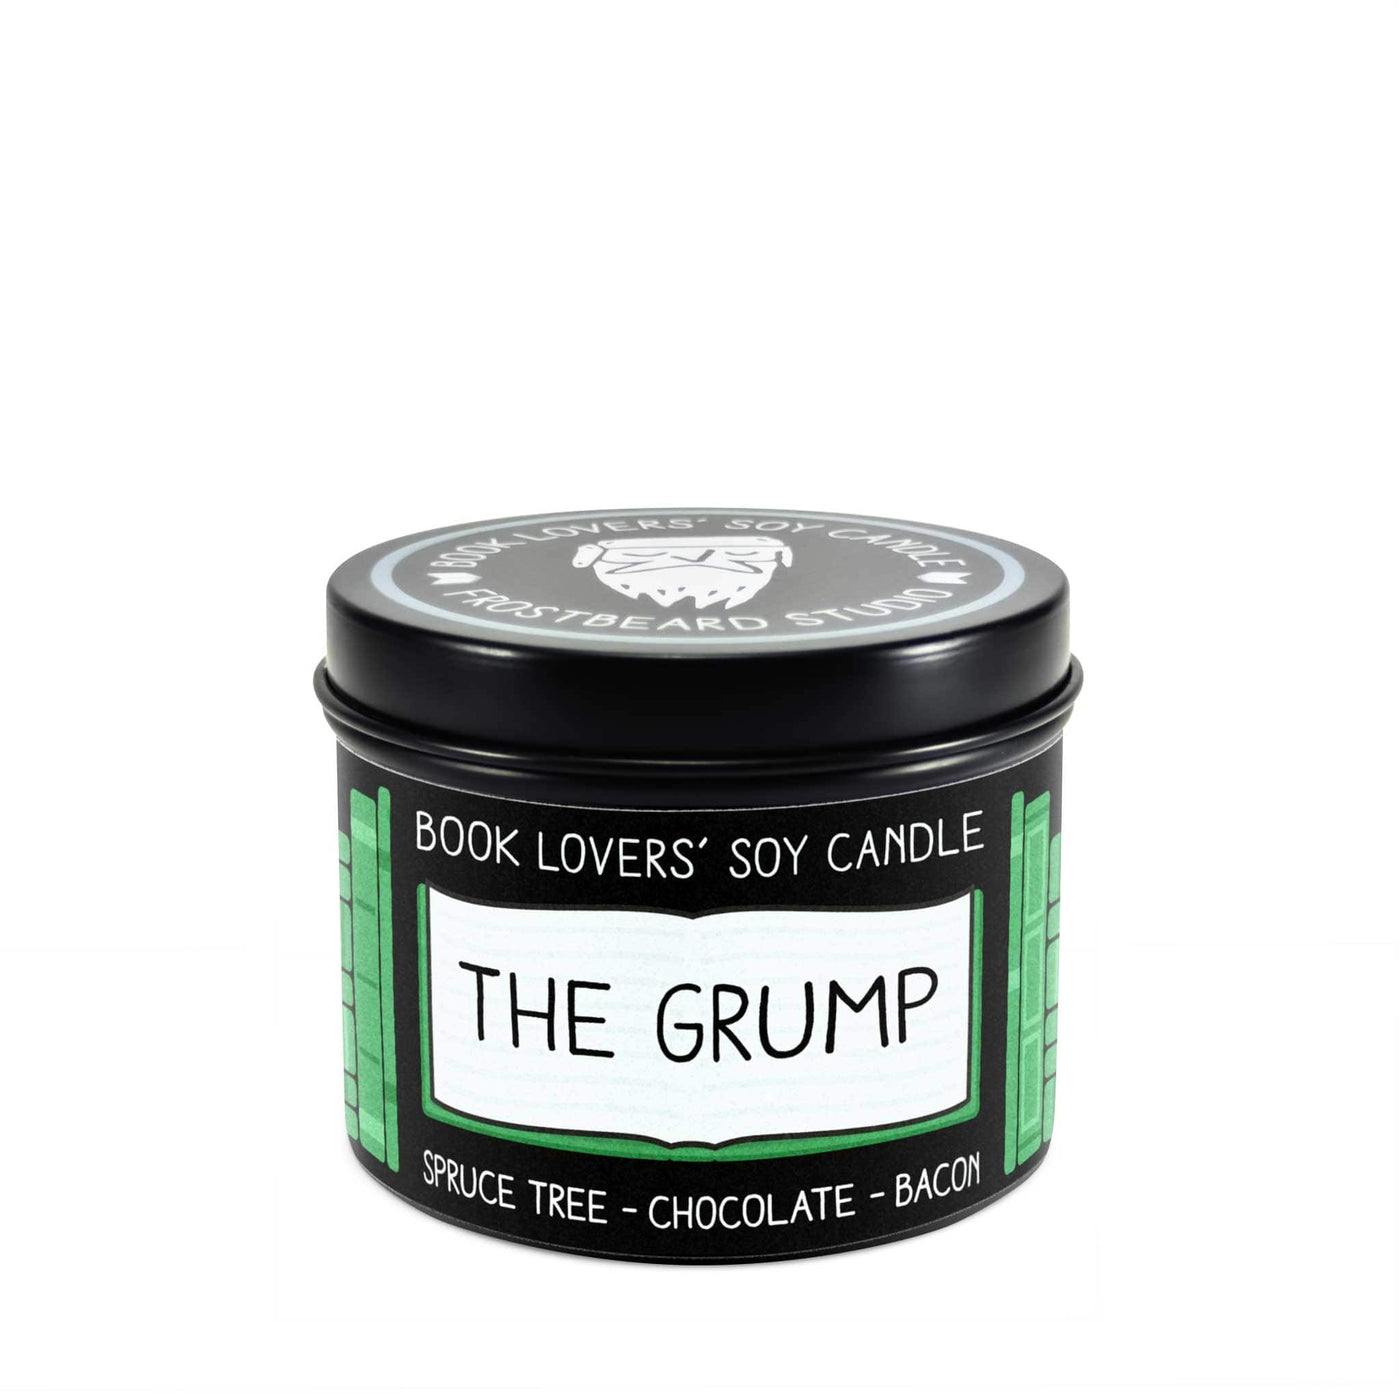 The Grump  -  4 oz Tin  -  Book Lovers' Soy Candle  -  Frostbeard Studio